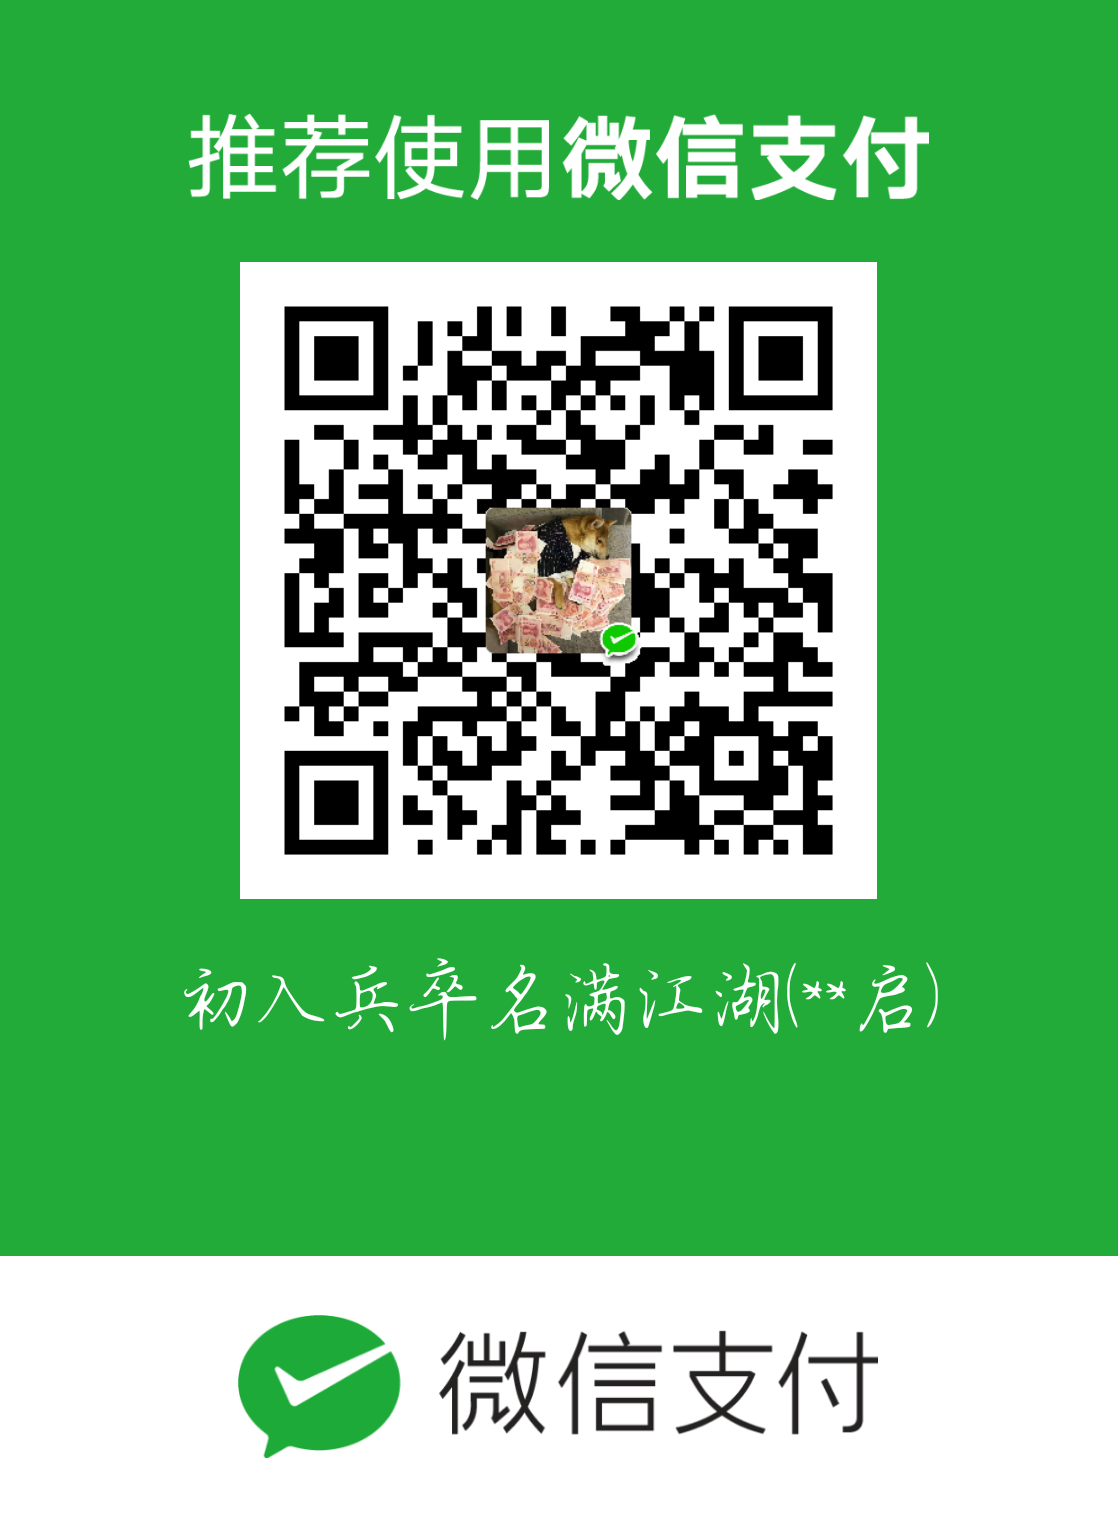 mm_facetoface_collect_qrcode_1569864549296.png